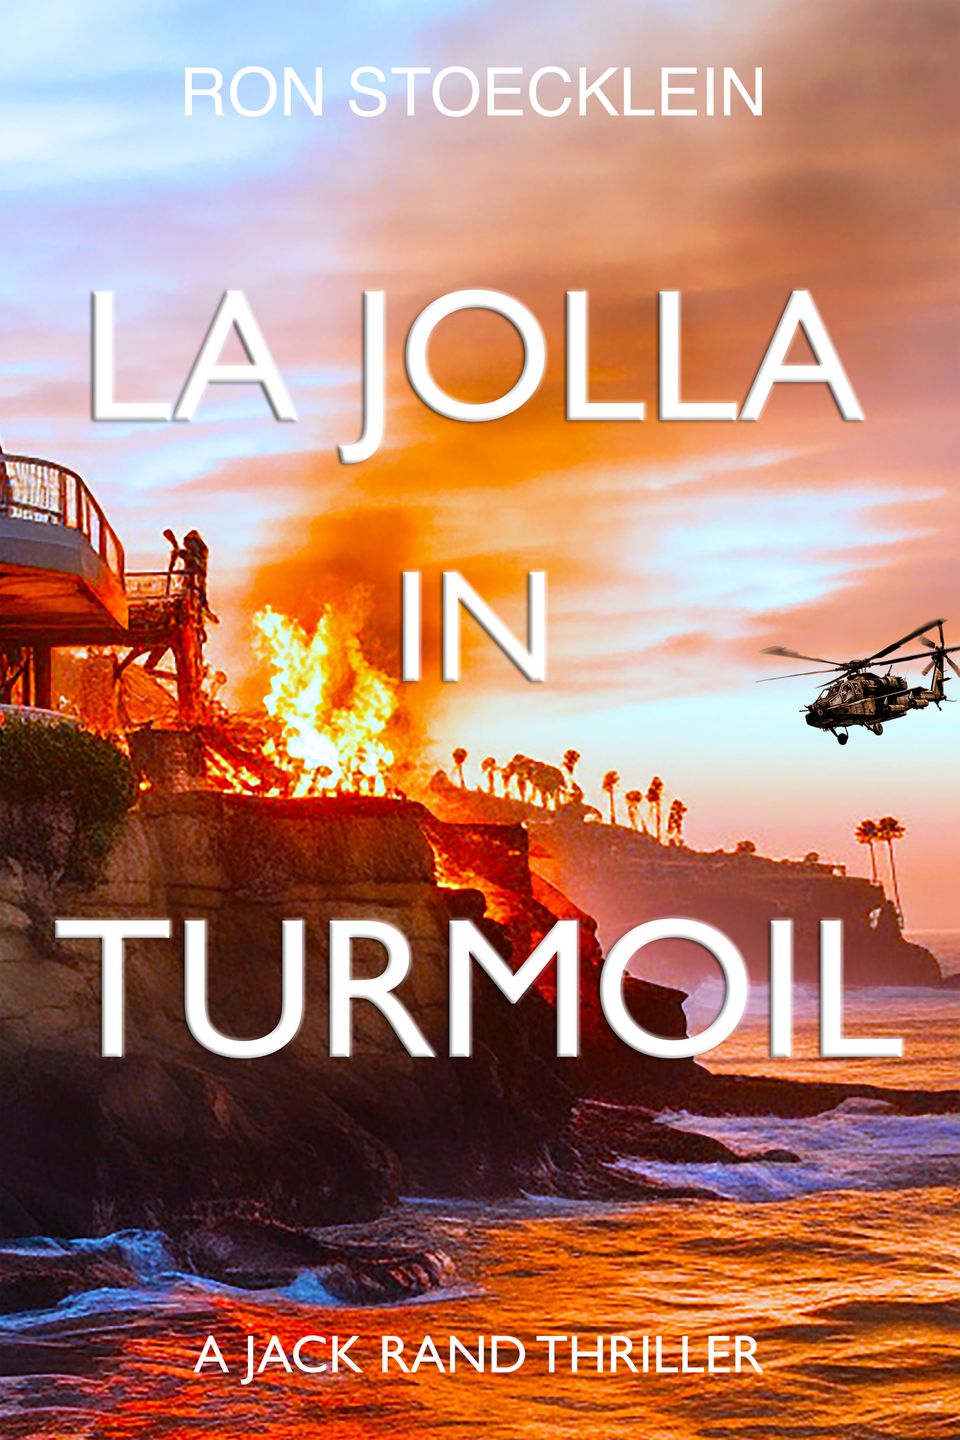 La Jolla in Turmoil by author Ron Stoecklein is an action packed thriller book